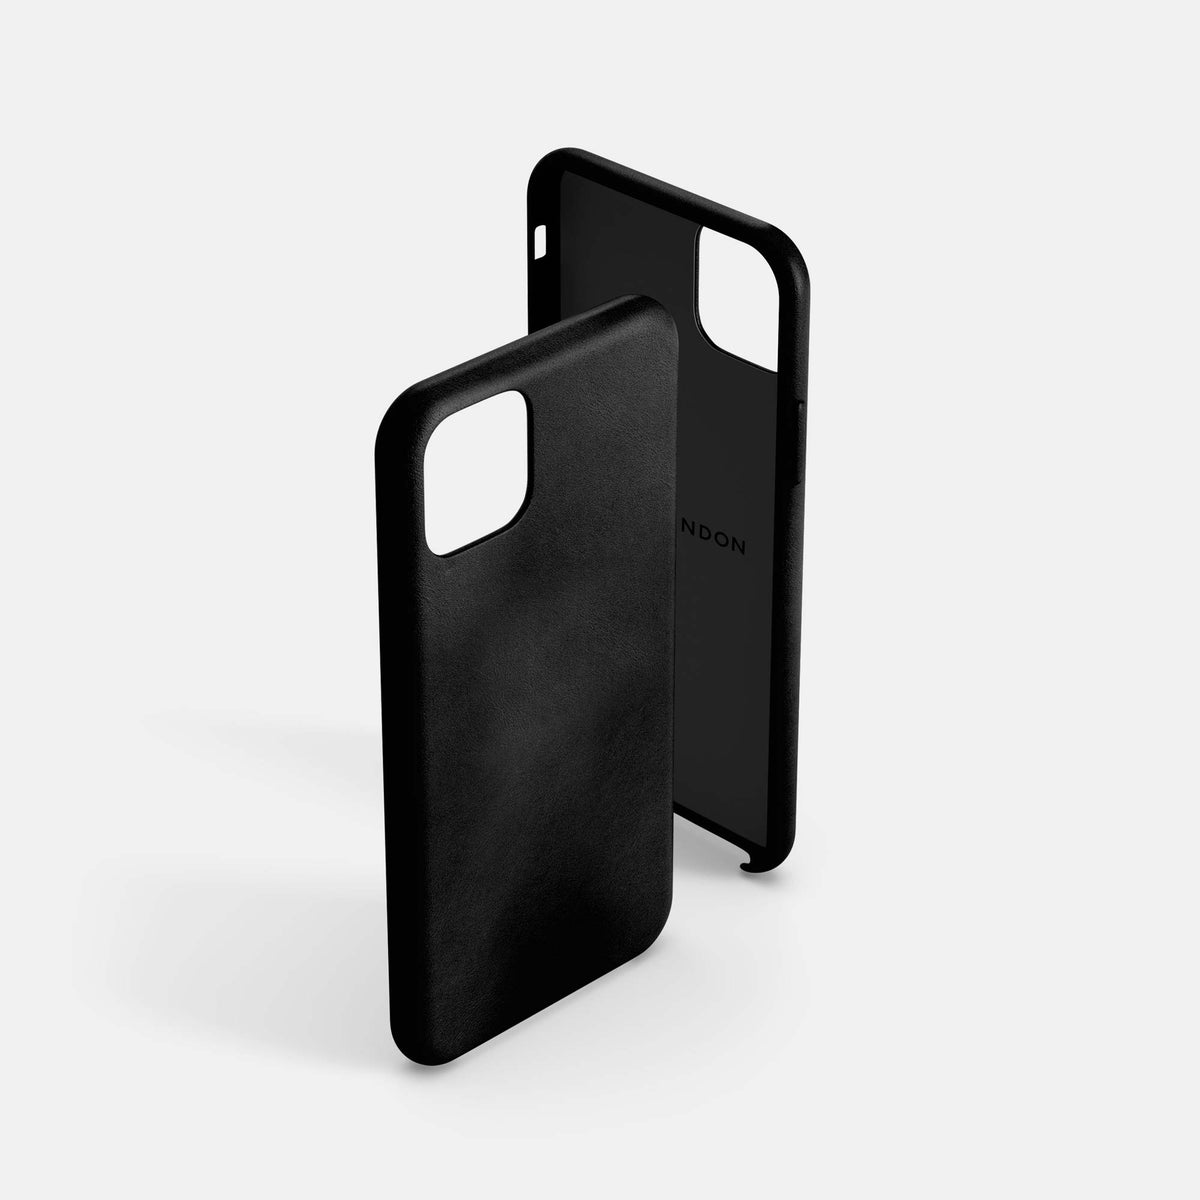 Leather iPhone 12 Pro Max Shell Case - Black - RYAN London